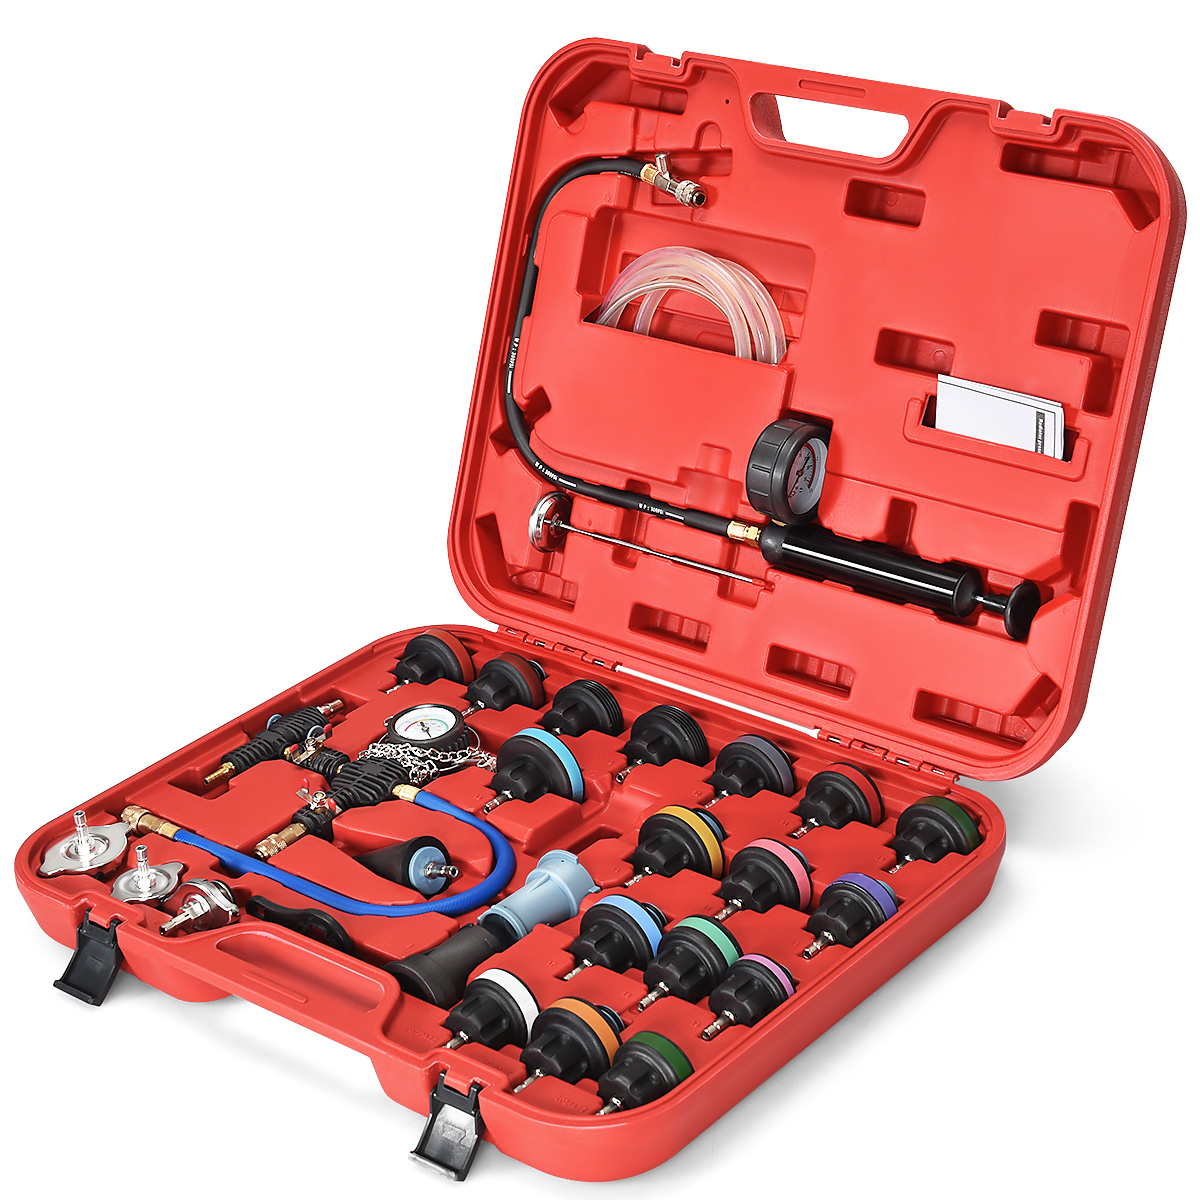 Costway 28 PCS Radiator Pressure Tester Vacuum-Type Cooling System Refill Kit W/Case Red